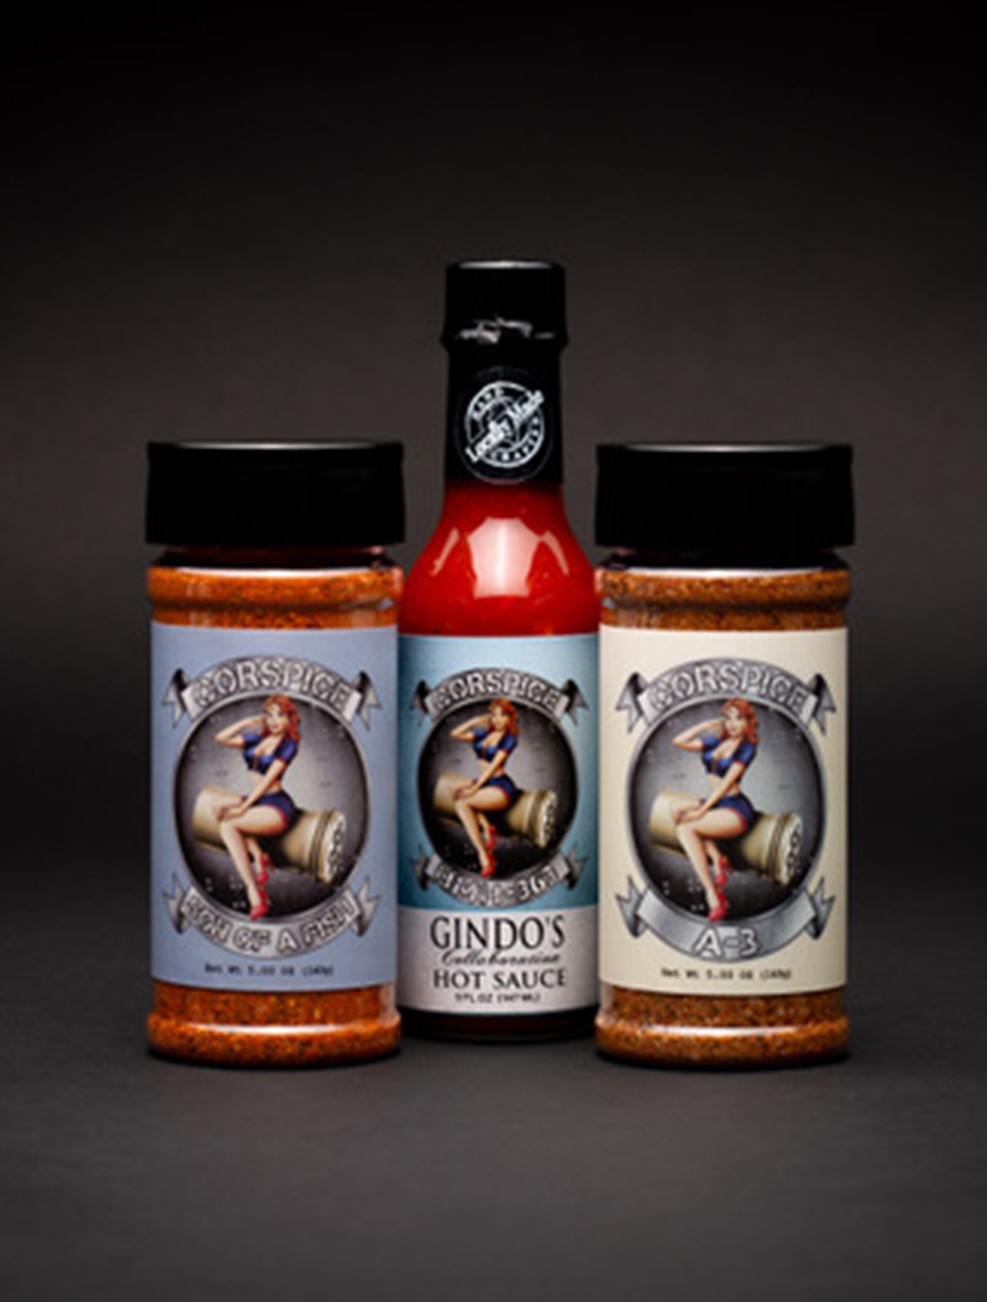 high quality spices and sauces from CORSPICE